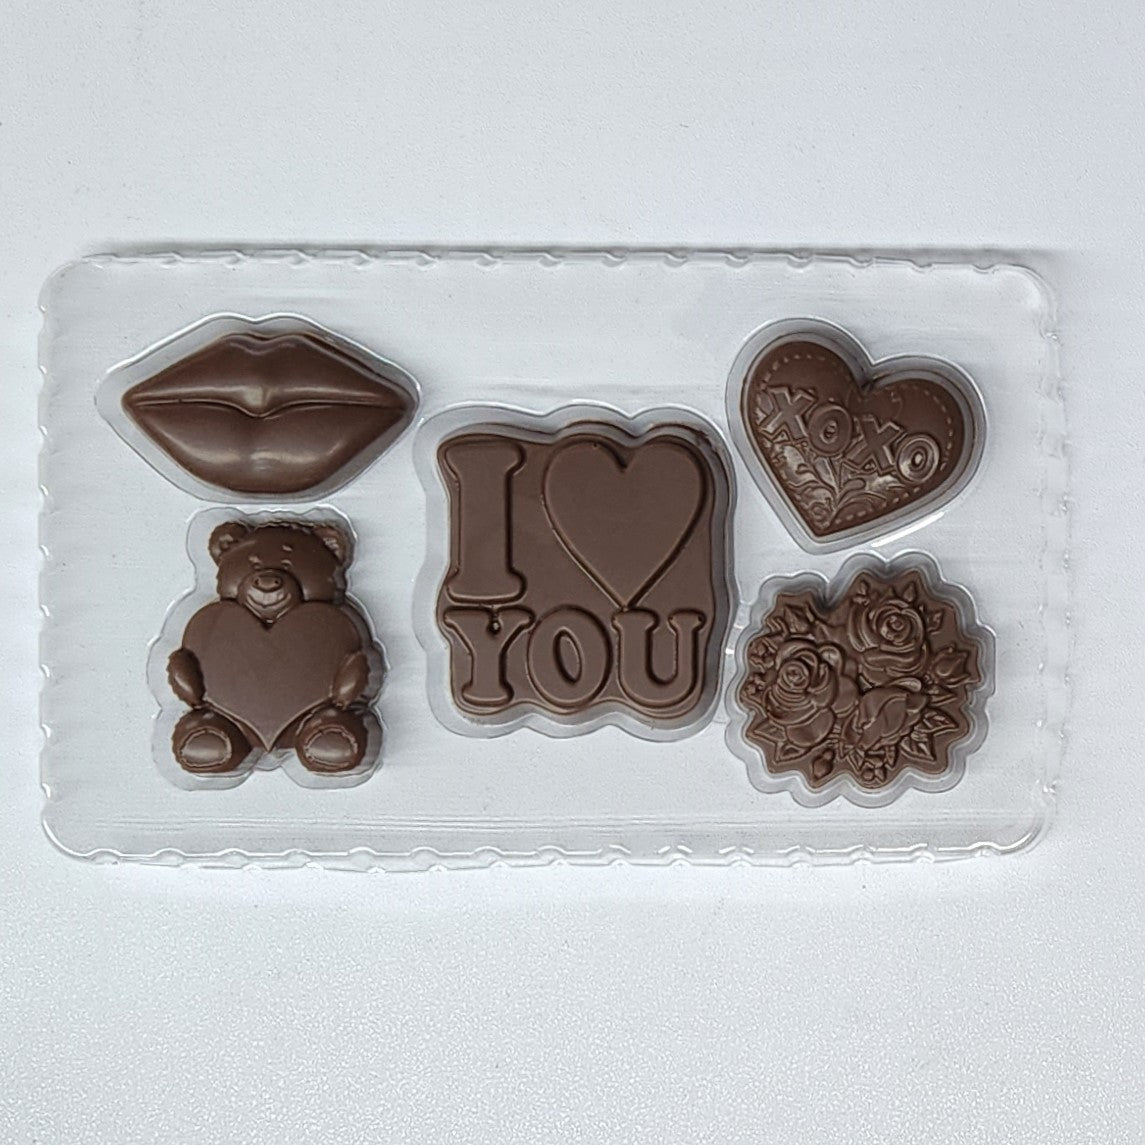 Valentine's Day Chocolate Gift Box set with chocolate lips, teddy bear, heart, flowers and 'I love you'